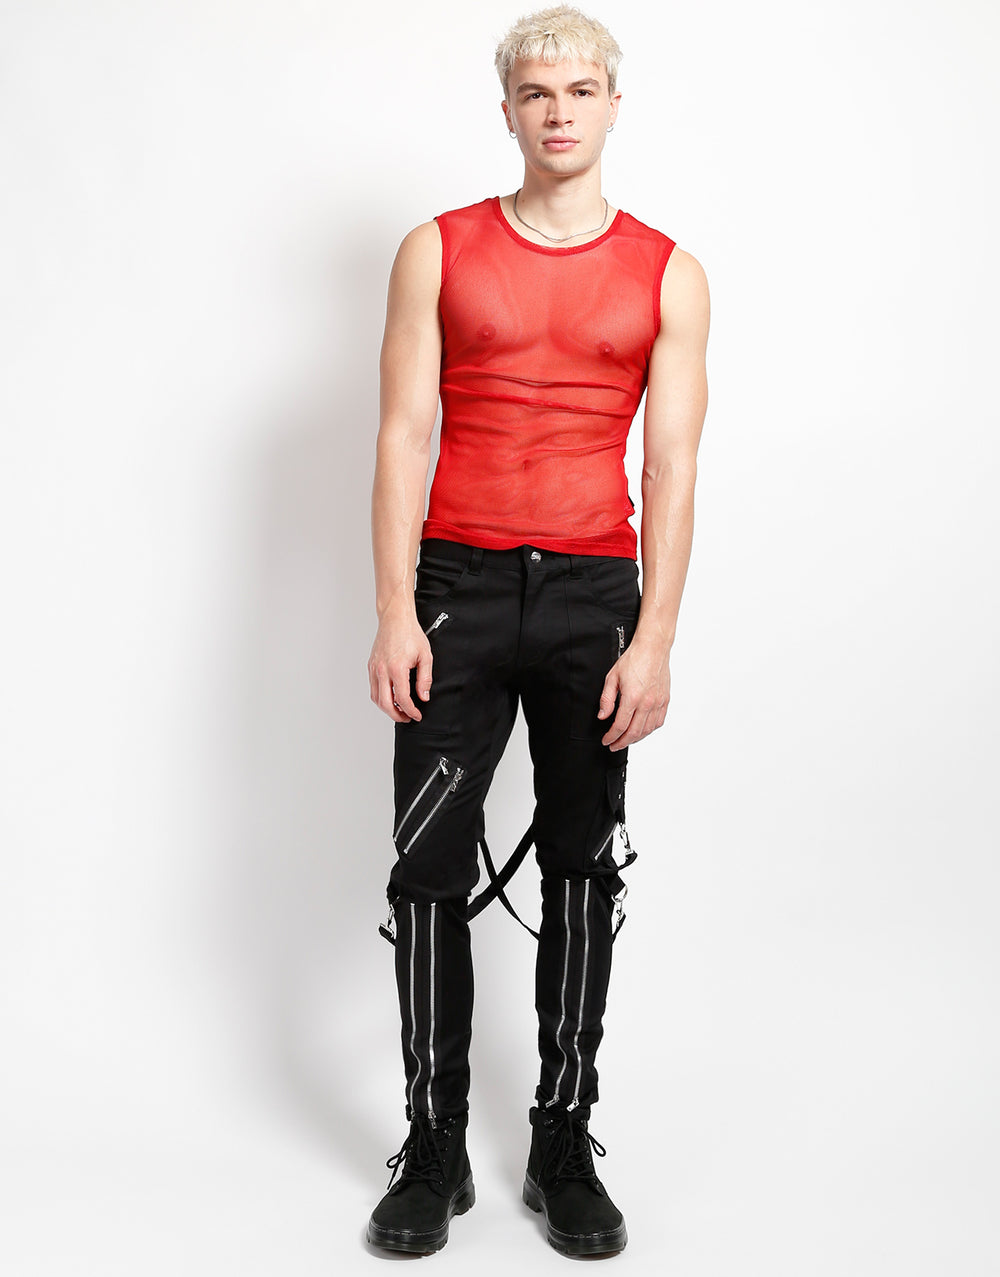 TRIPP NYC - MUSCLE TANK FISHNET RED